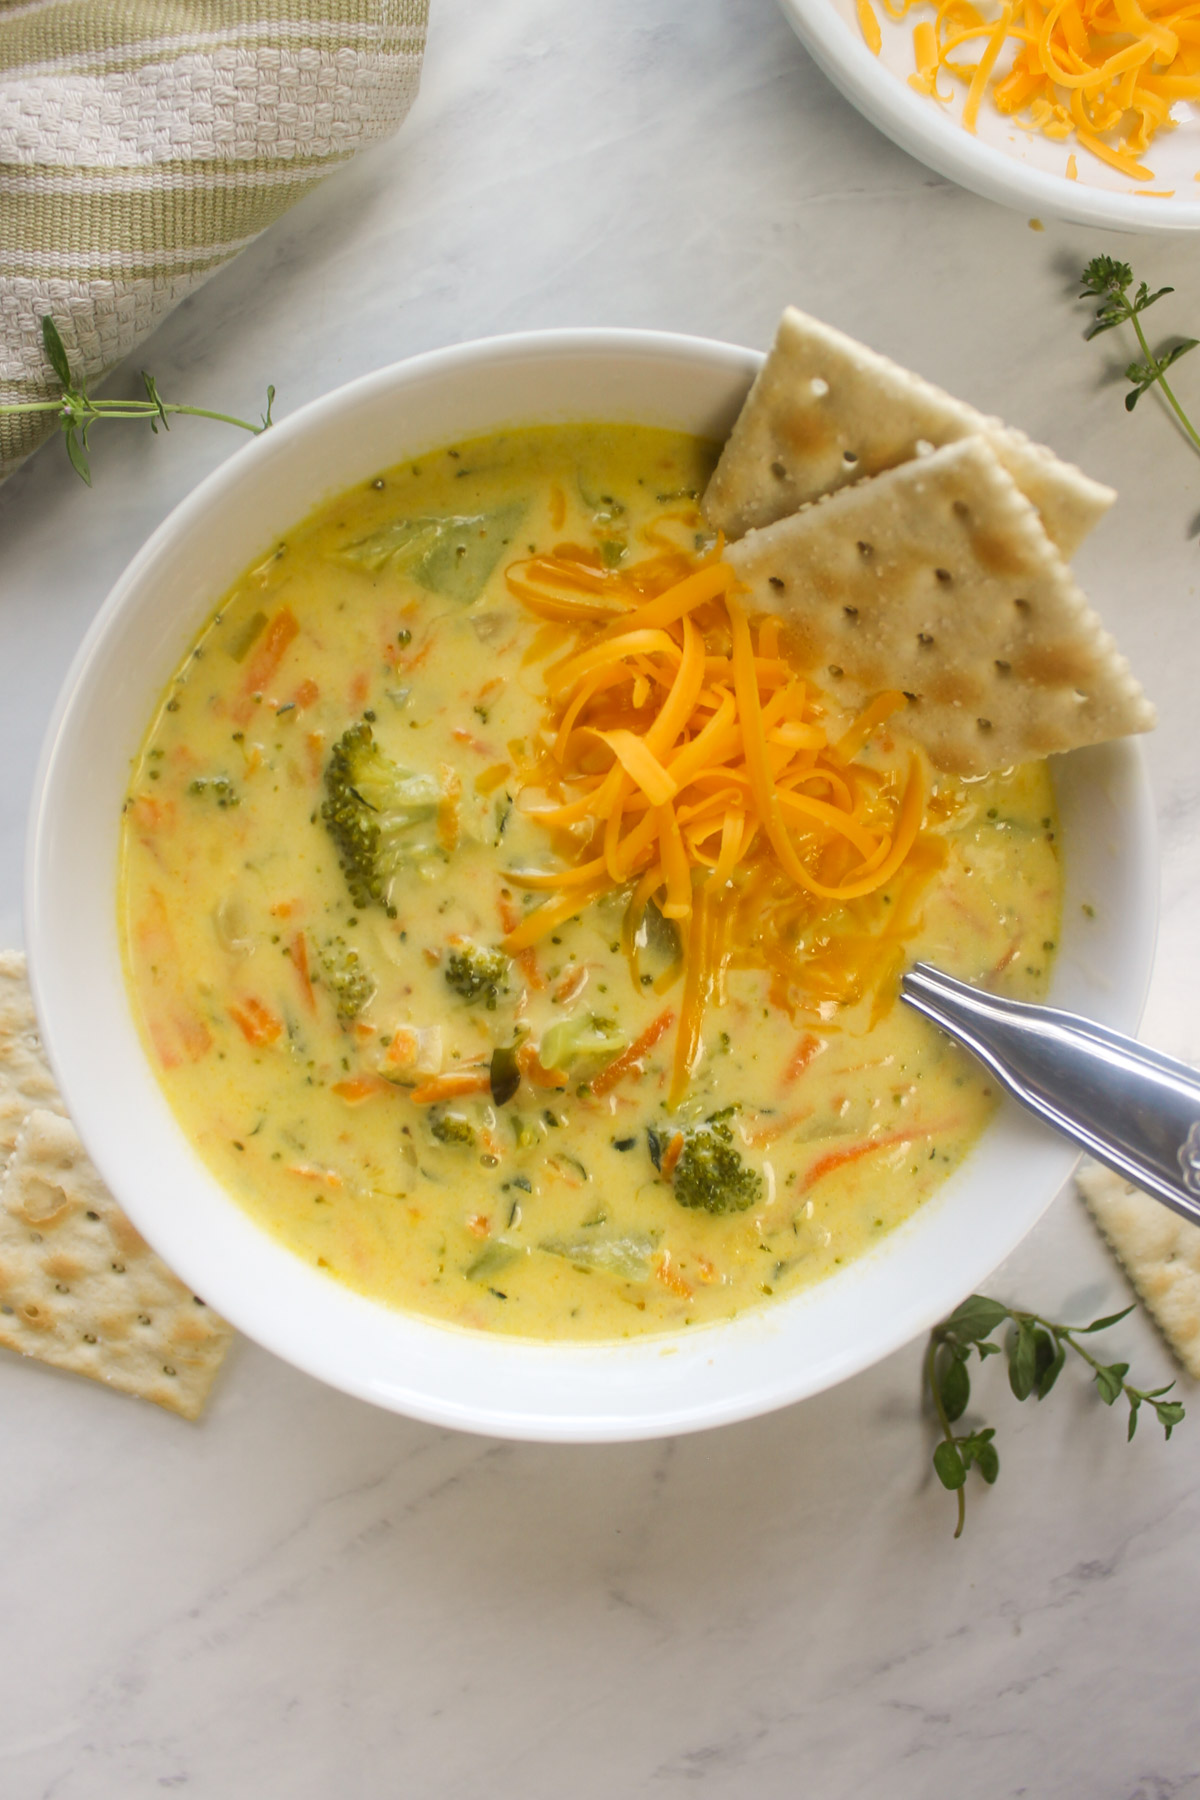 A bowl of broccoli zucchini soup with shredded cheddar cheese and crackers.